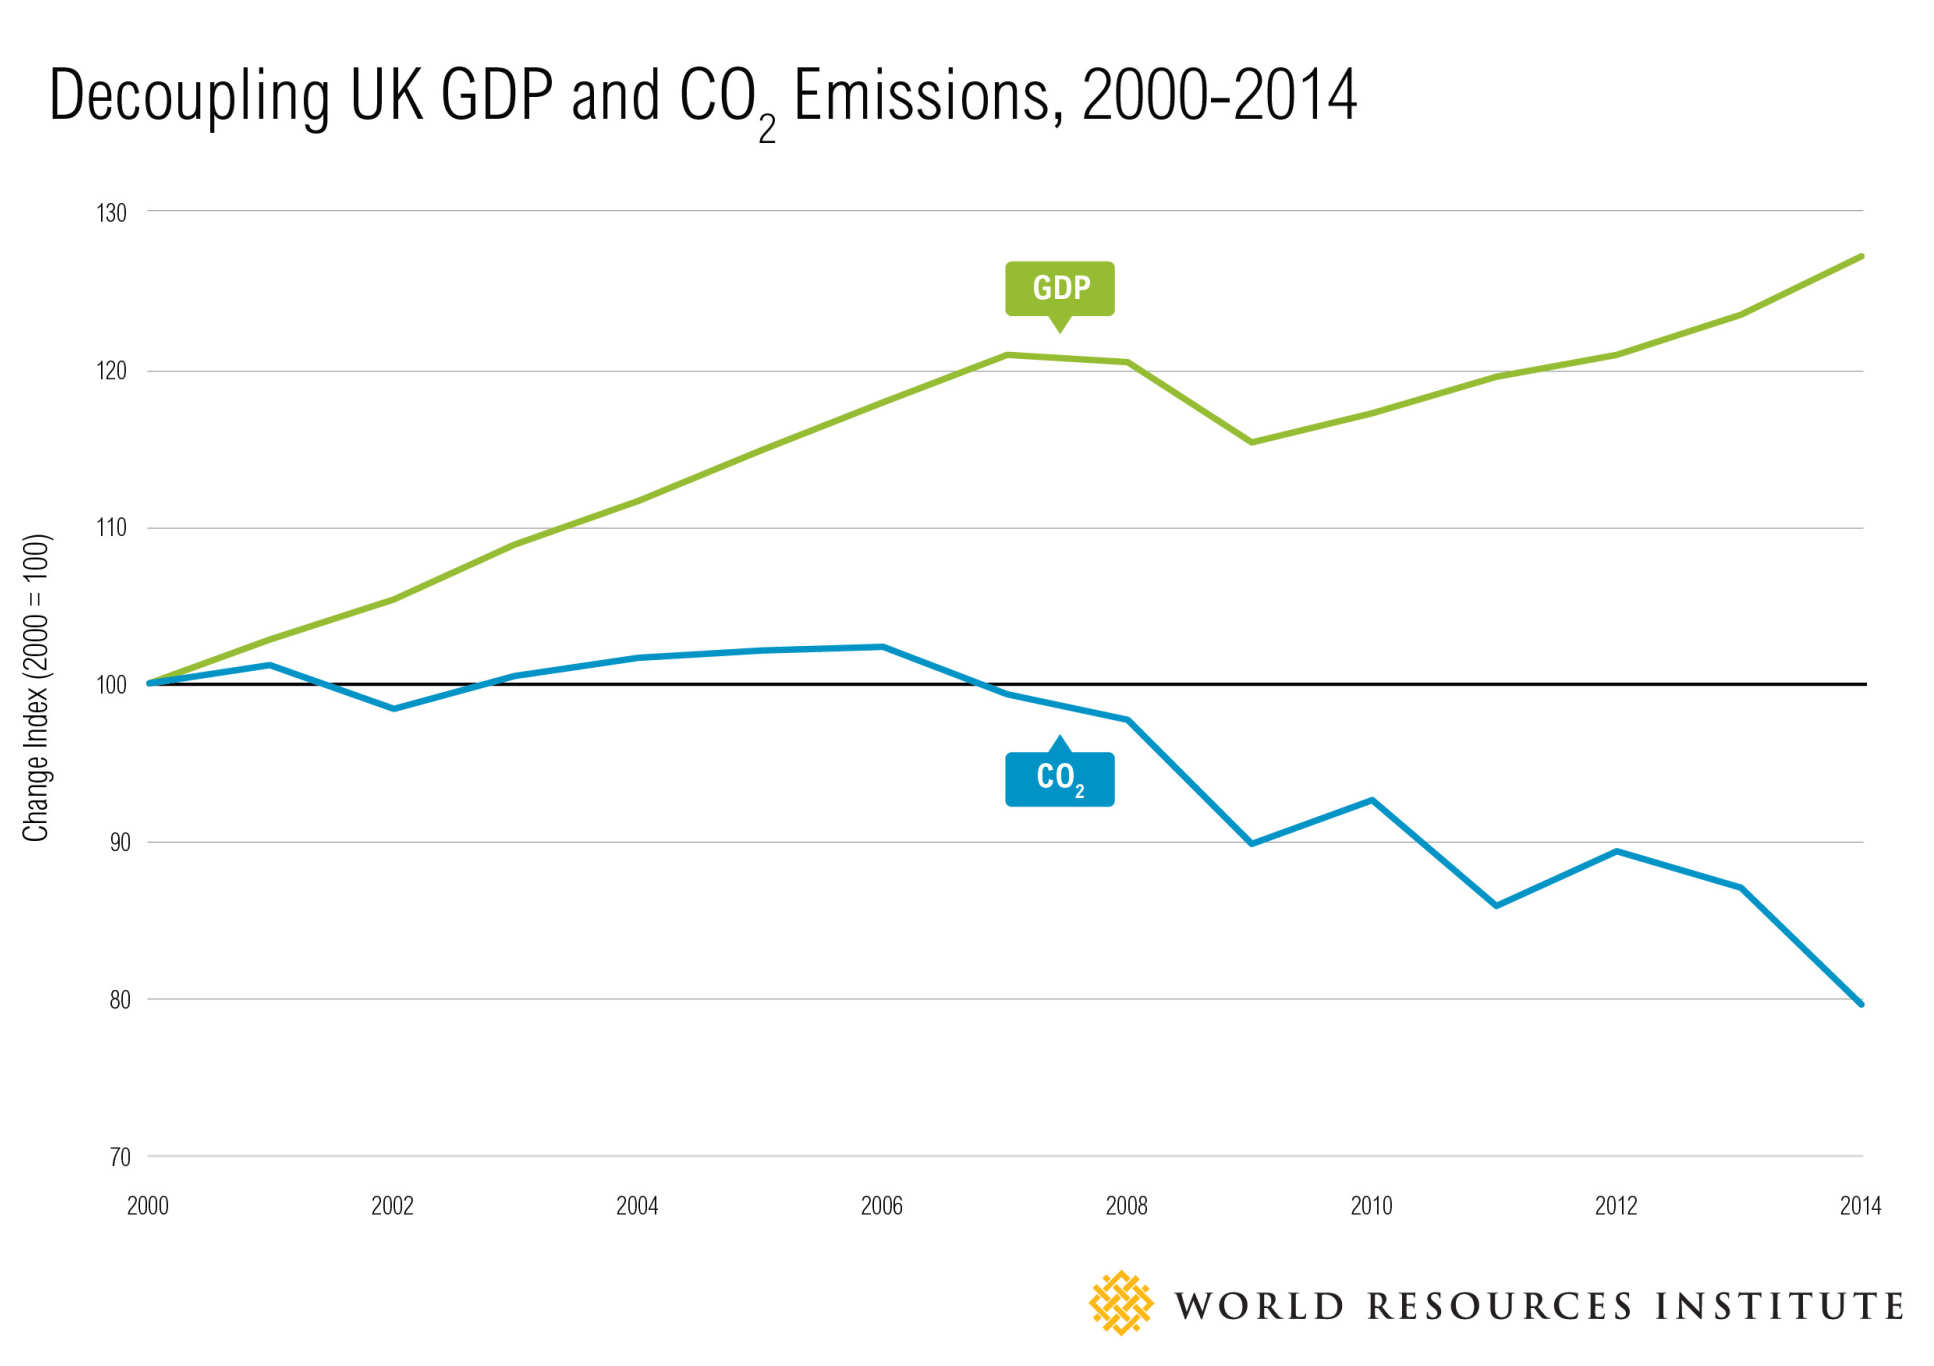 Graph showing decoupling of economic growth and CO2 emissions in the UK